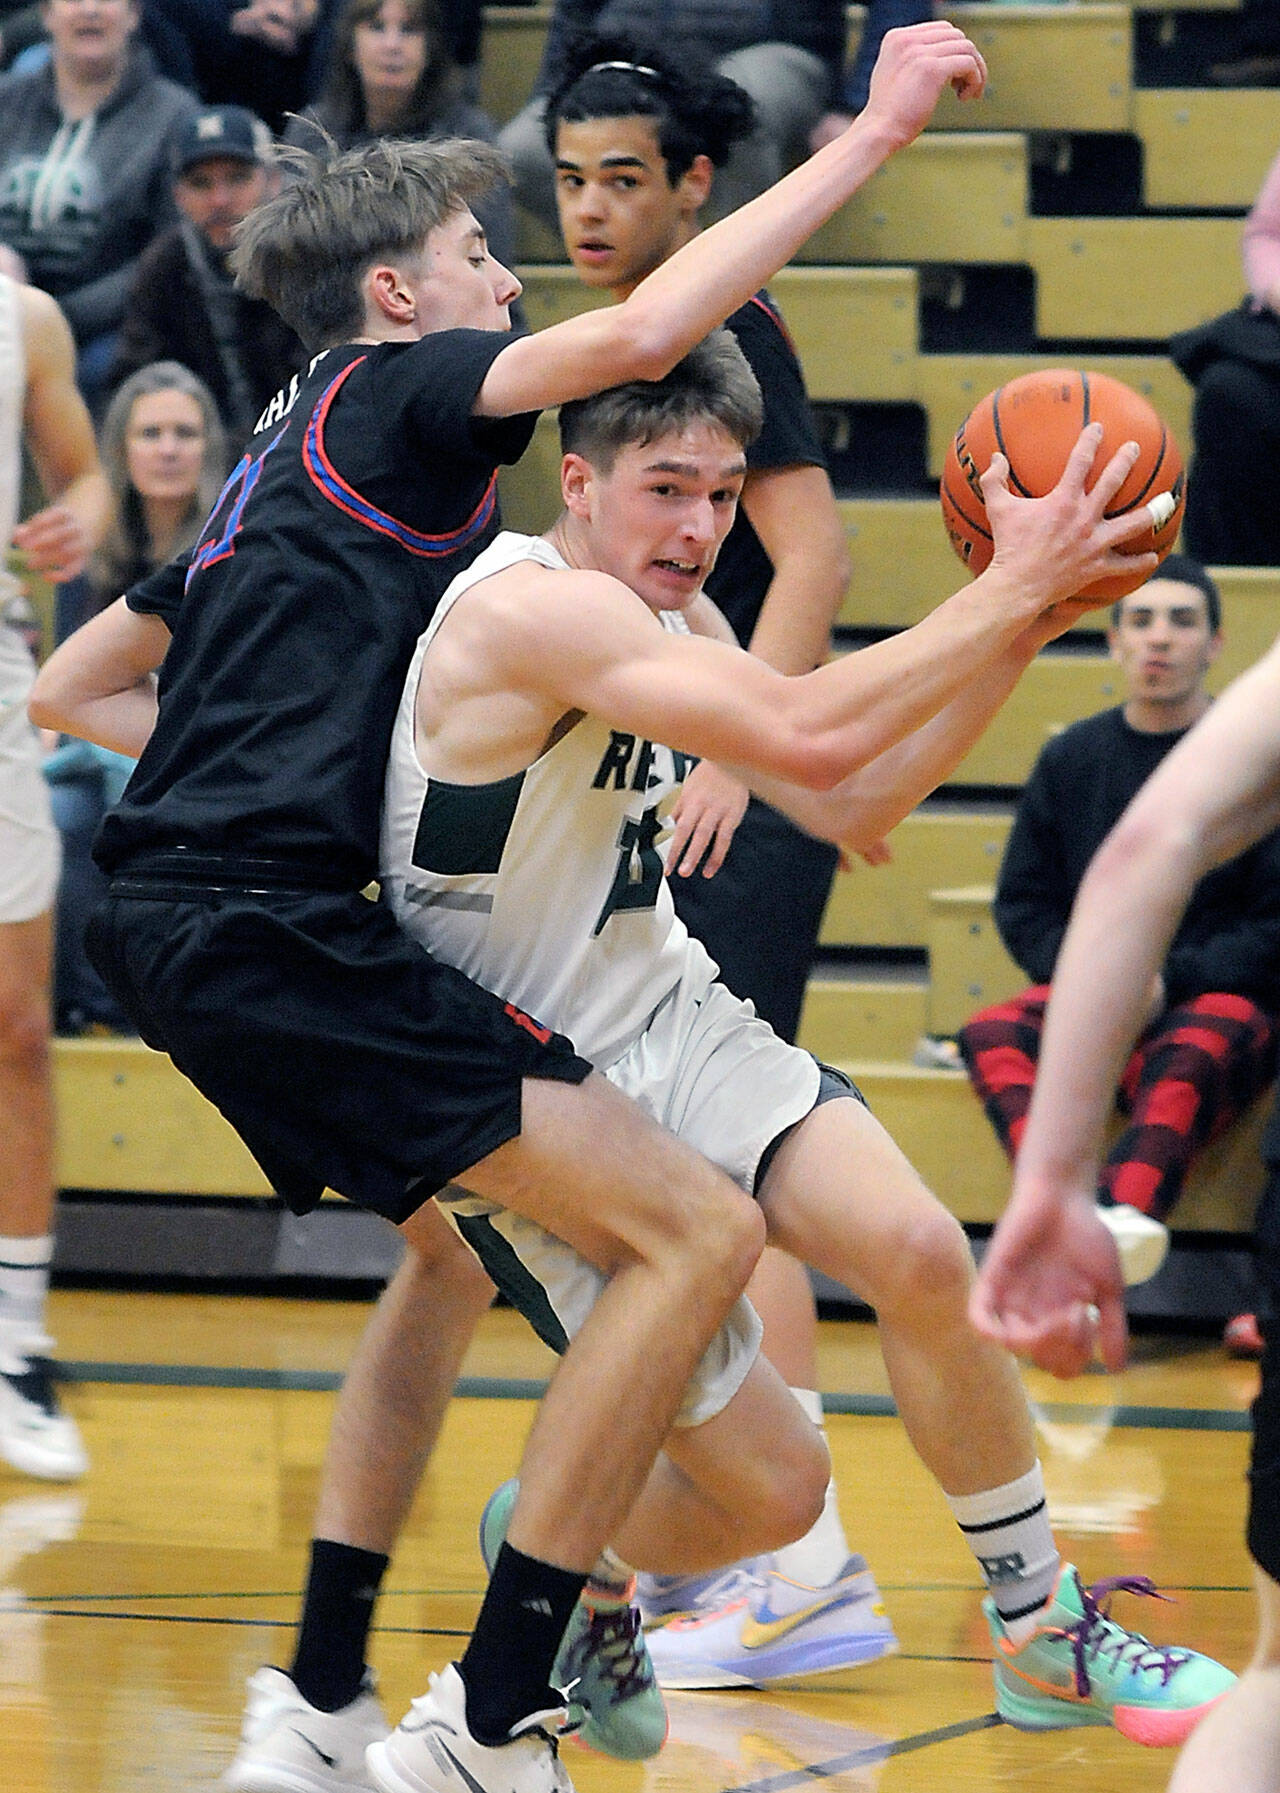 KEITH THORPE/PENINSULA DAILY NEWS Port Angeles’ Josiah Long, right, tries to escape the defense of East Jefferson’s Stuart Dow during Thursday’s game at Port Angeles High School.